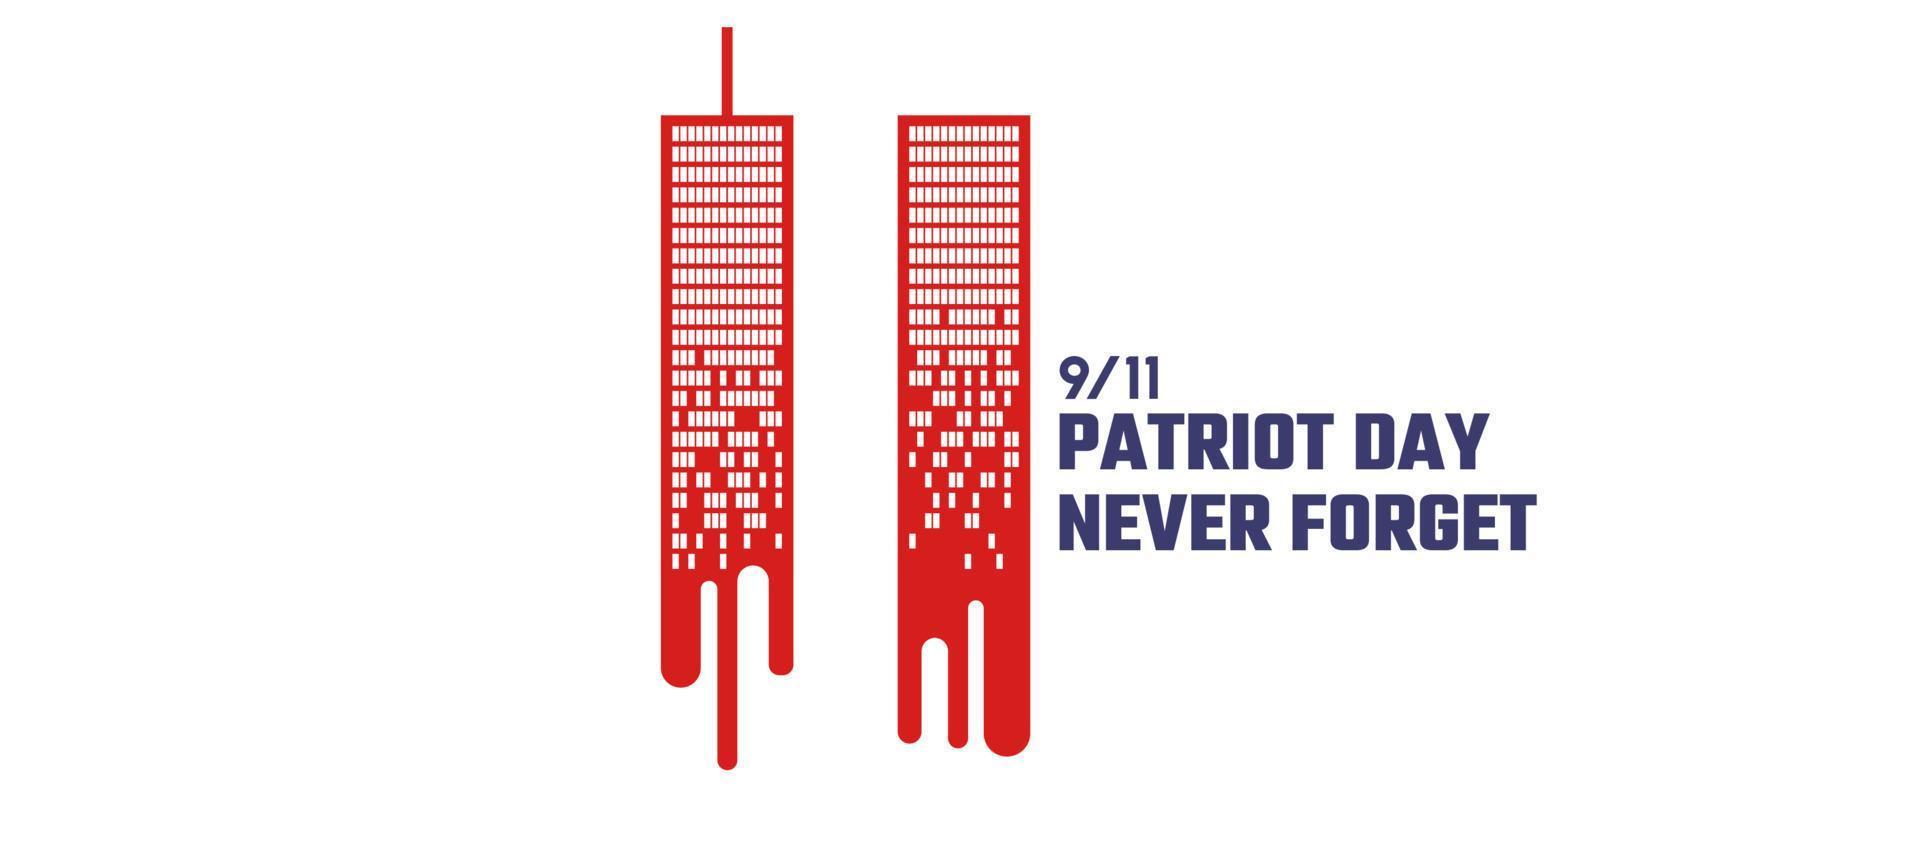 9 11 memorial day September 11.Patriot day NYC World Trade Center. We will never forget, the terrorist attacks of september 11. World Trade Center melt like blood vector